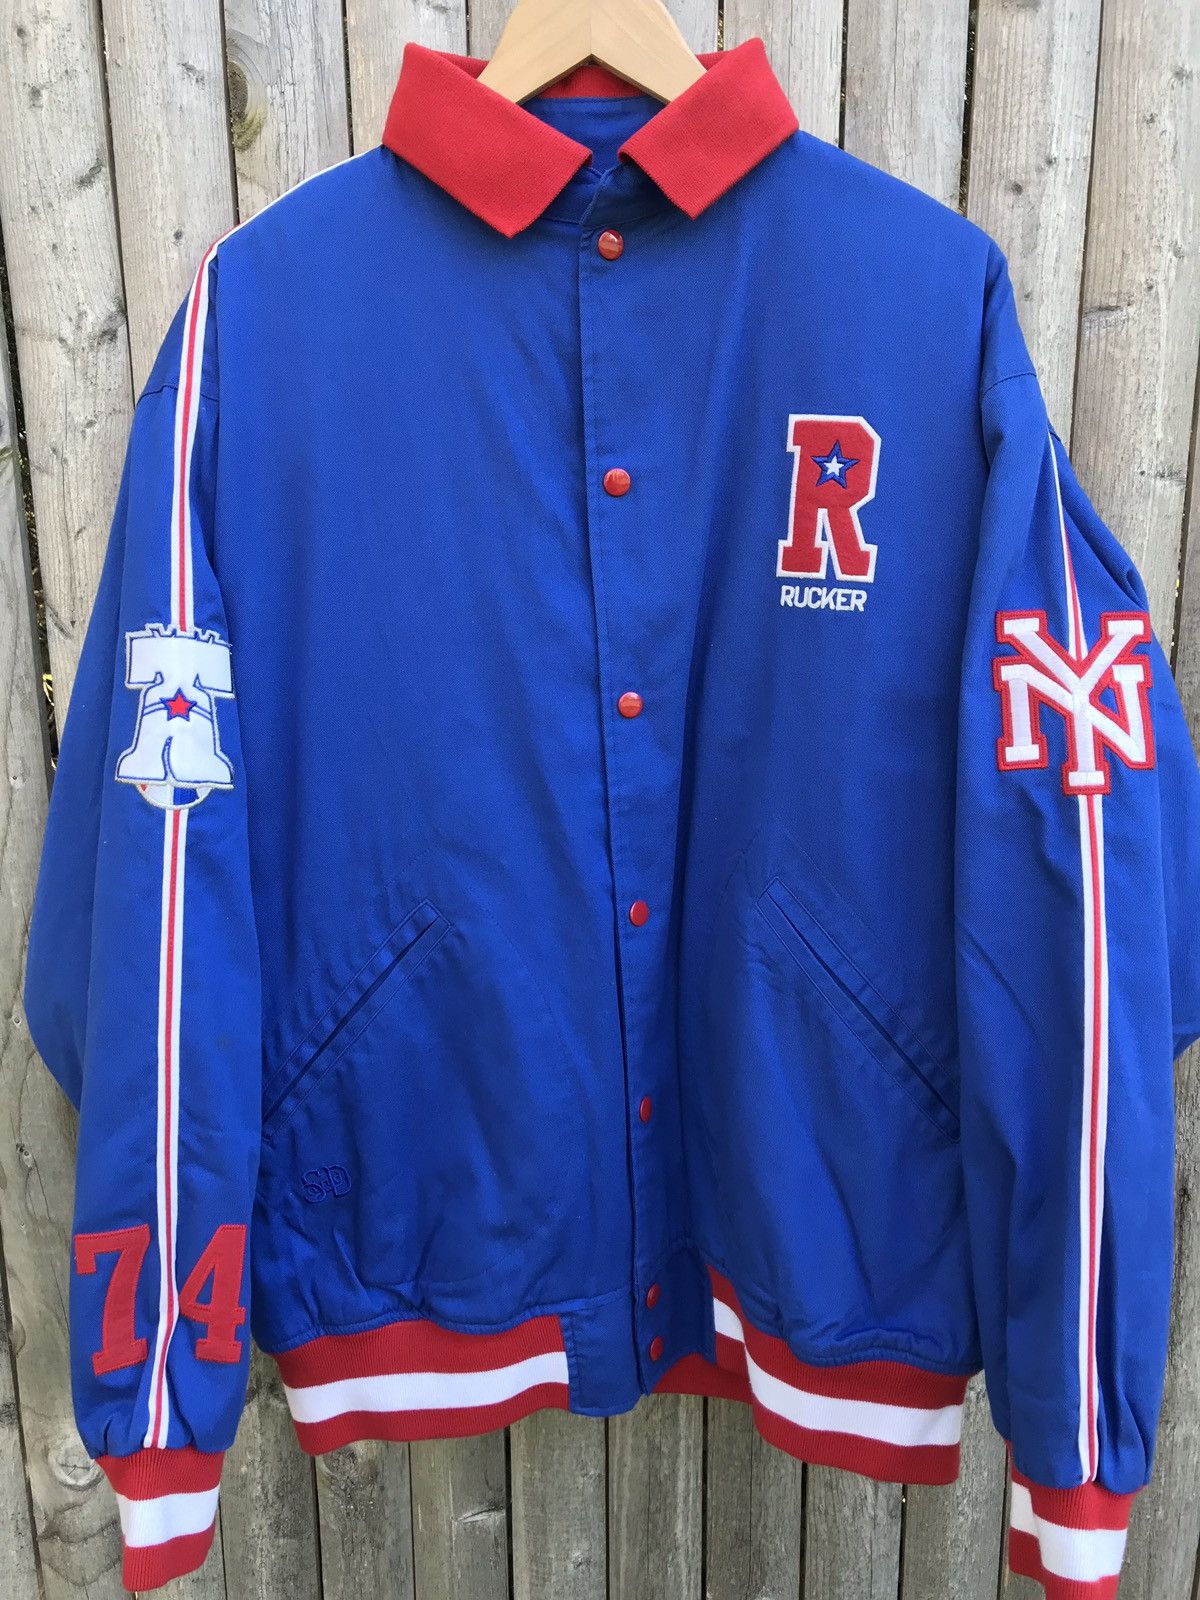 Stall And Dean Vintage Rucker Harlem NYC Jacket | Grailed